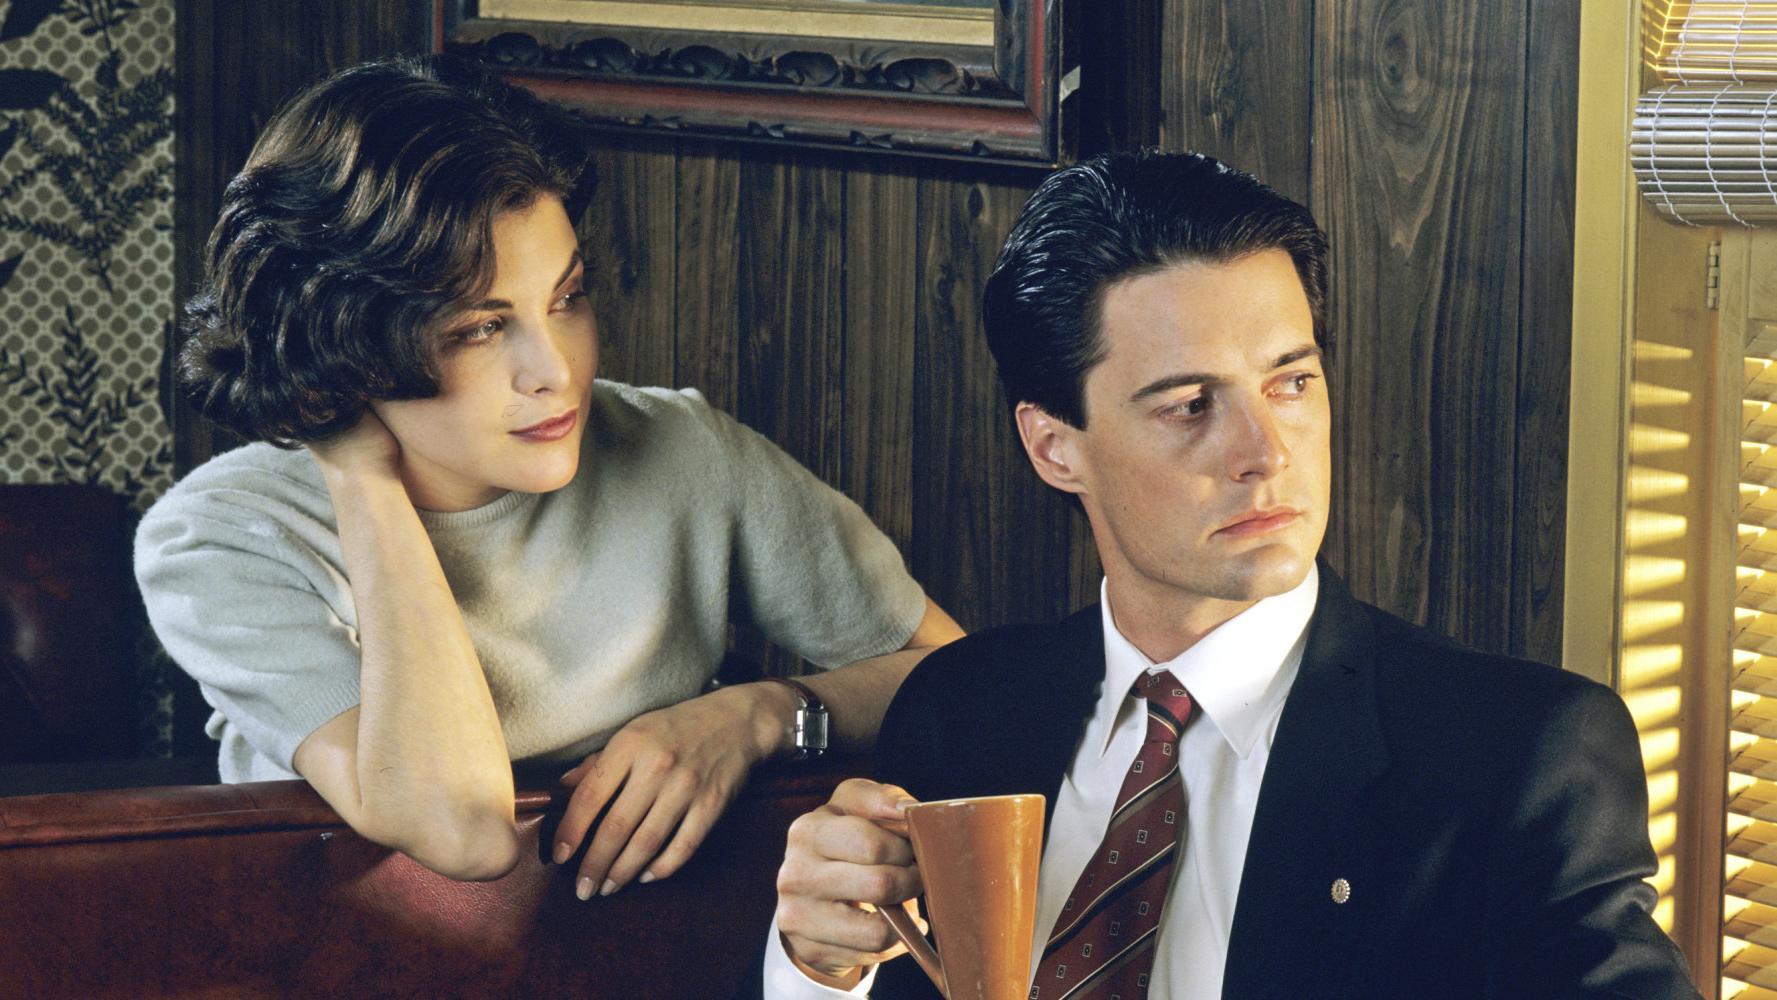 Agent Dale Cooper and Audrey Horne